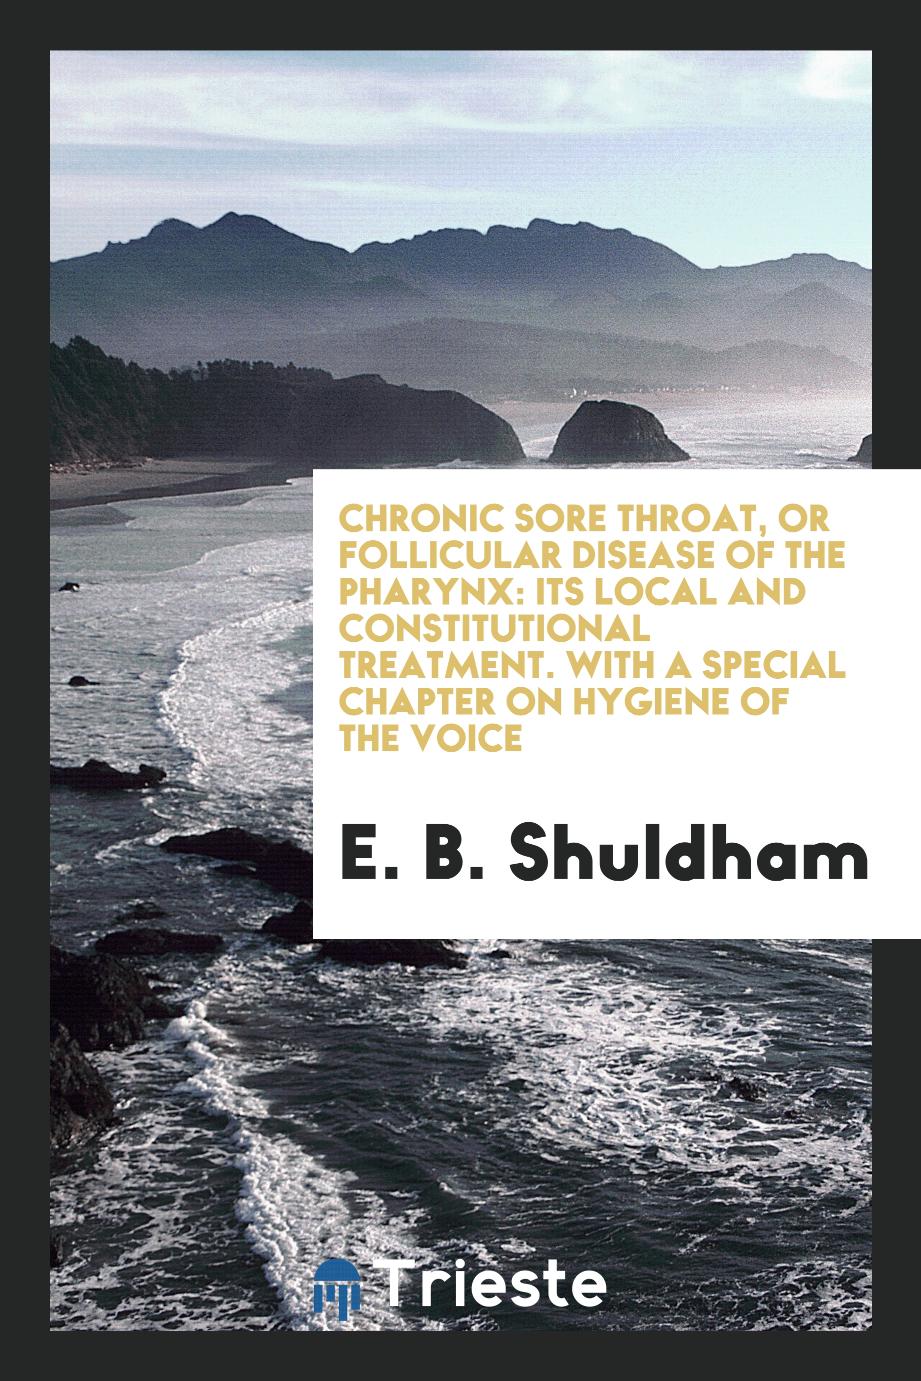 Chronic Sore Throat, or Follicular Disease of the Pharynx: Its Local and Constitutional Treatment. With a Special Chapter on Hygiene of the Voice